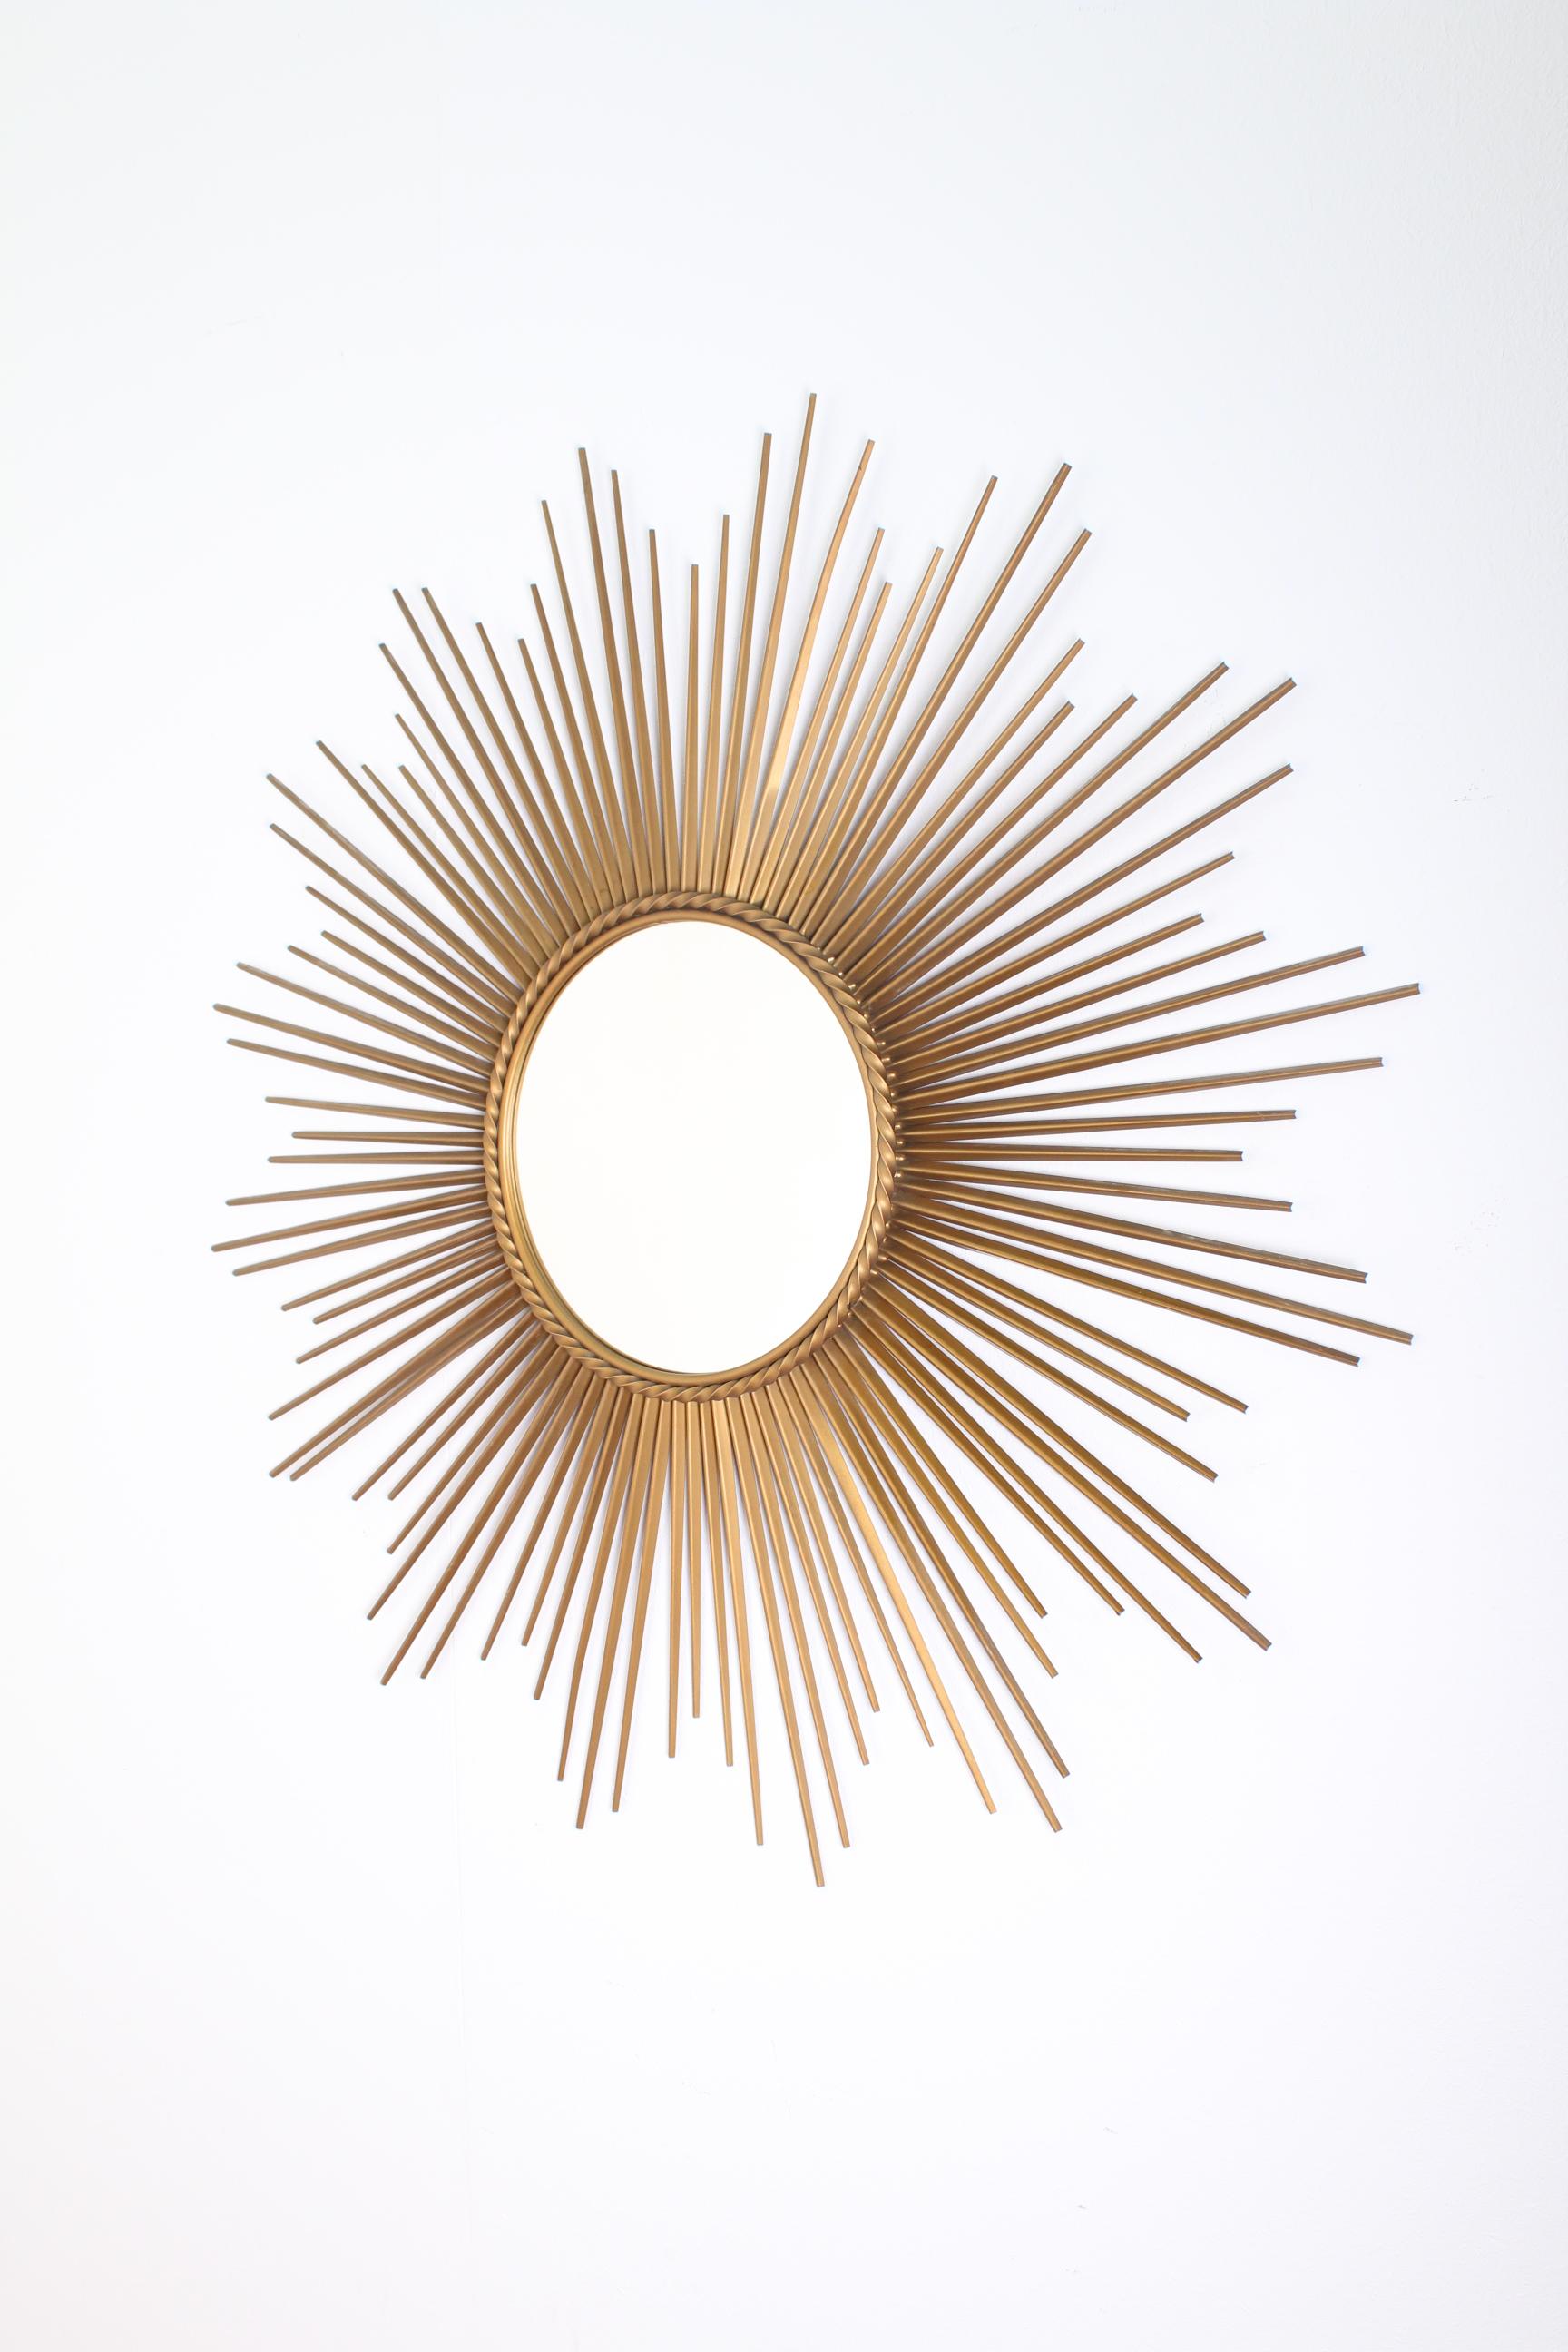 Elegant and beautiful gilded metal framed sunburst mirror made in the 1960s in France by Chaty Vallauris. Very elegant and in very good condition. With mirrored glass center in molded frame with rope motif trim.
 Wear consistent with age and use.